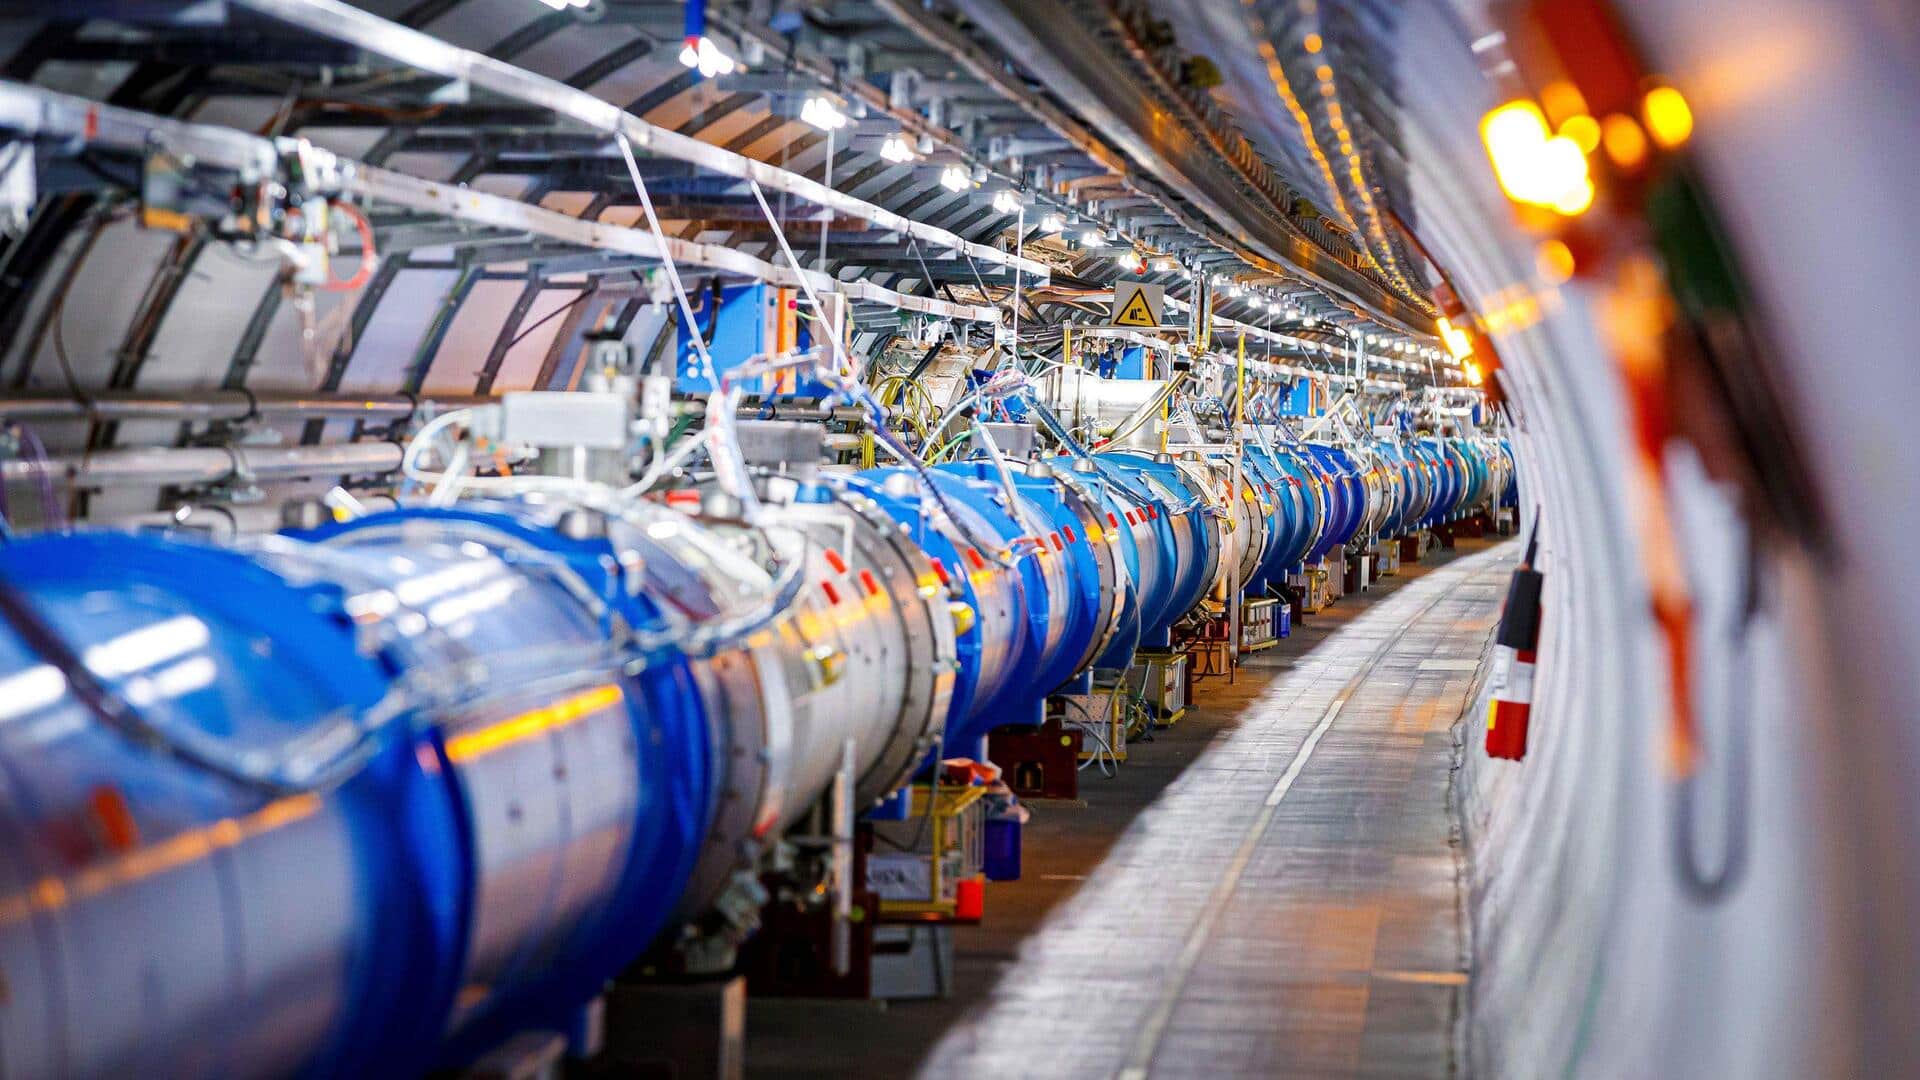 China capable of building world's largest particle collider: CERN president